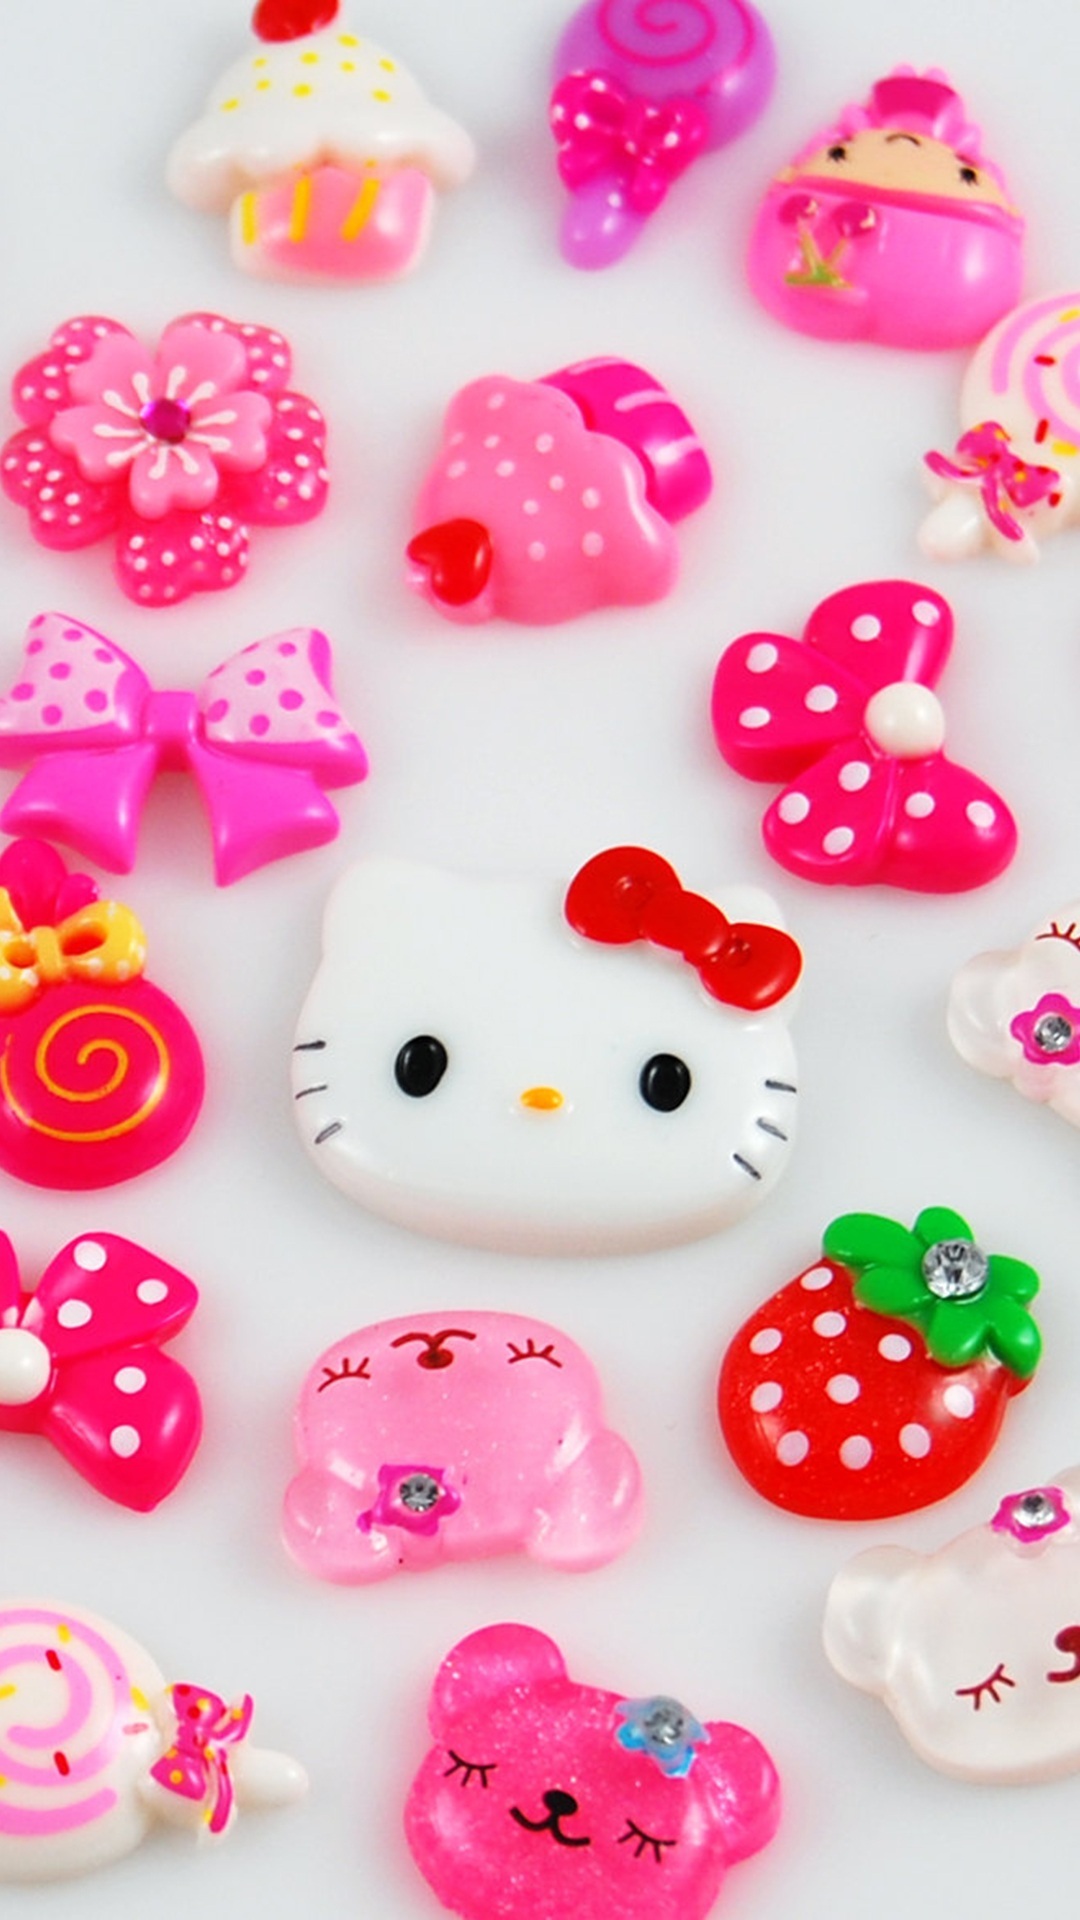 45+ Free HD Quality Cute iphone Wallpapers-Background Images